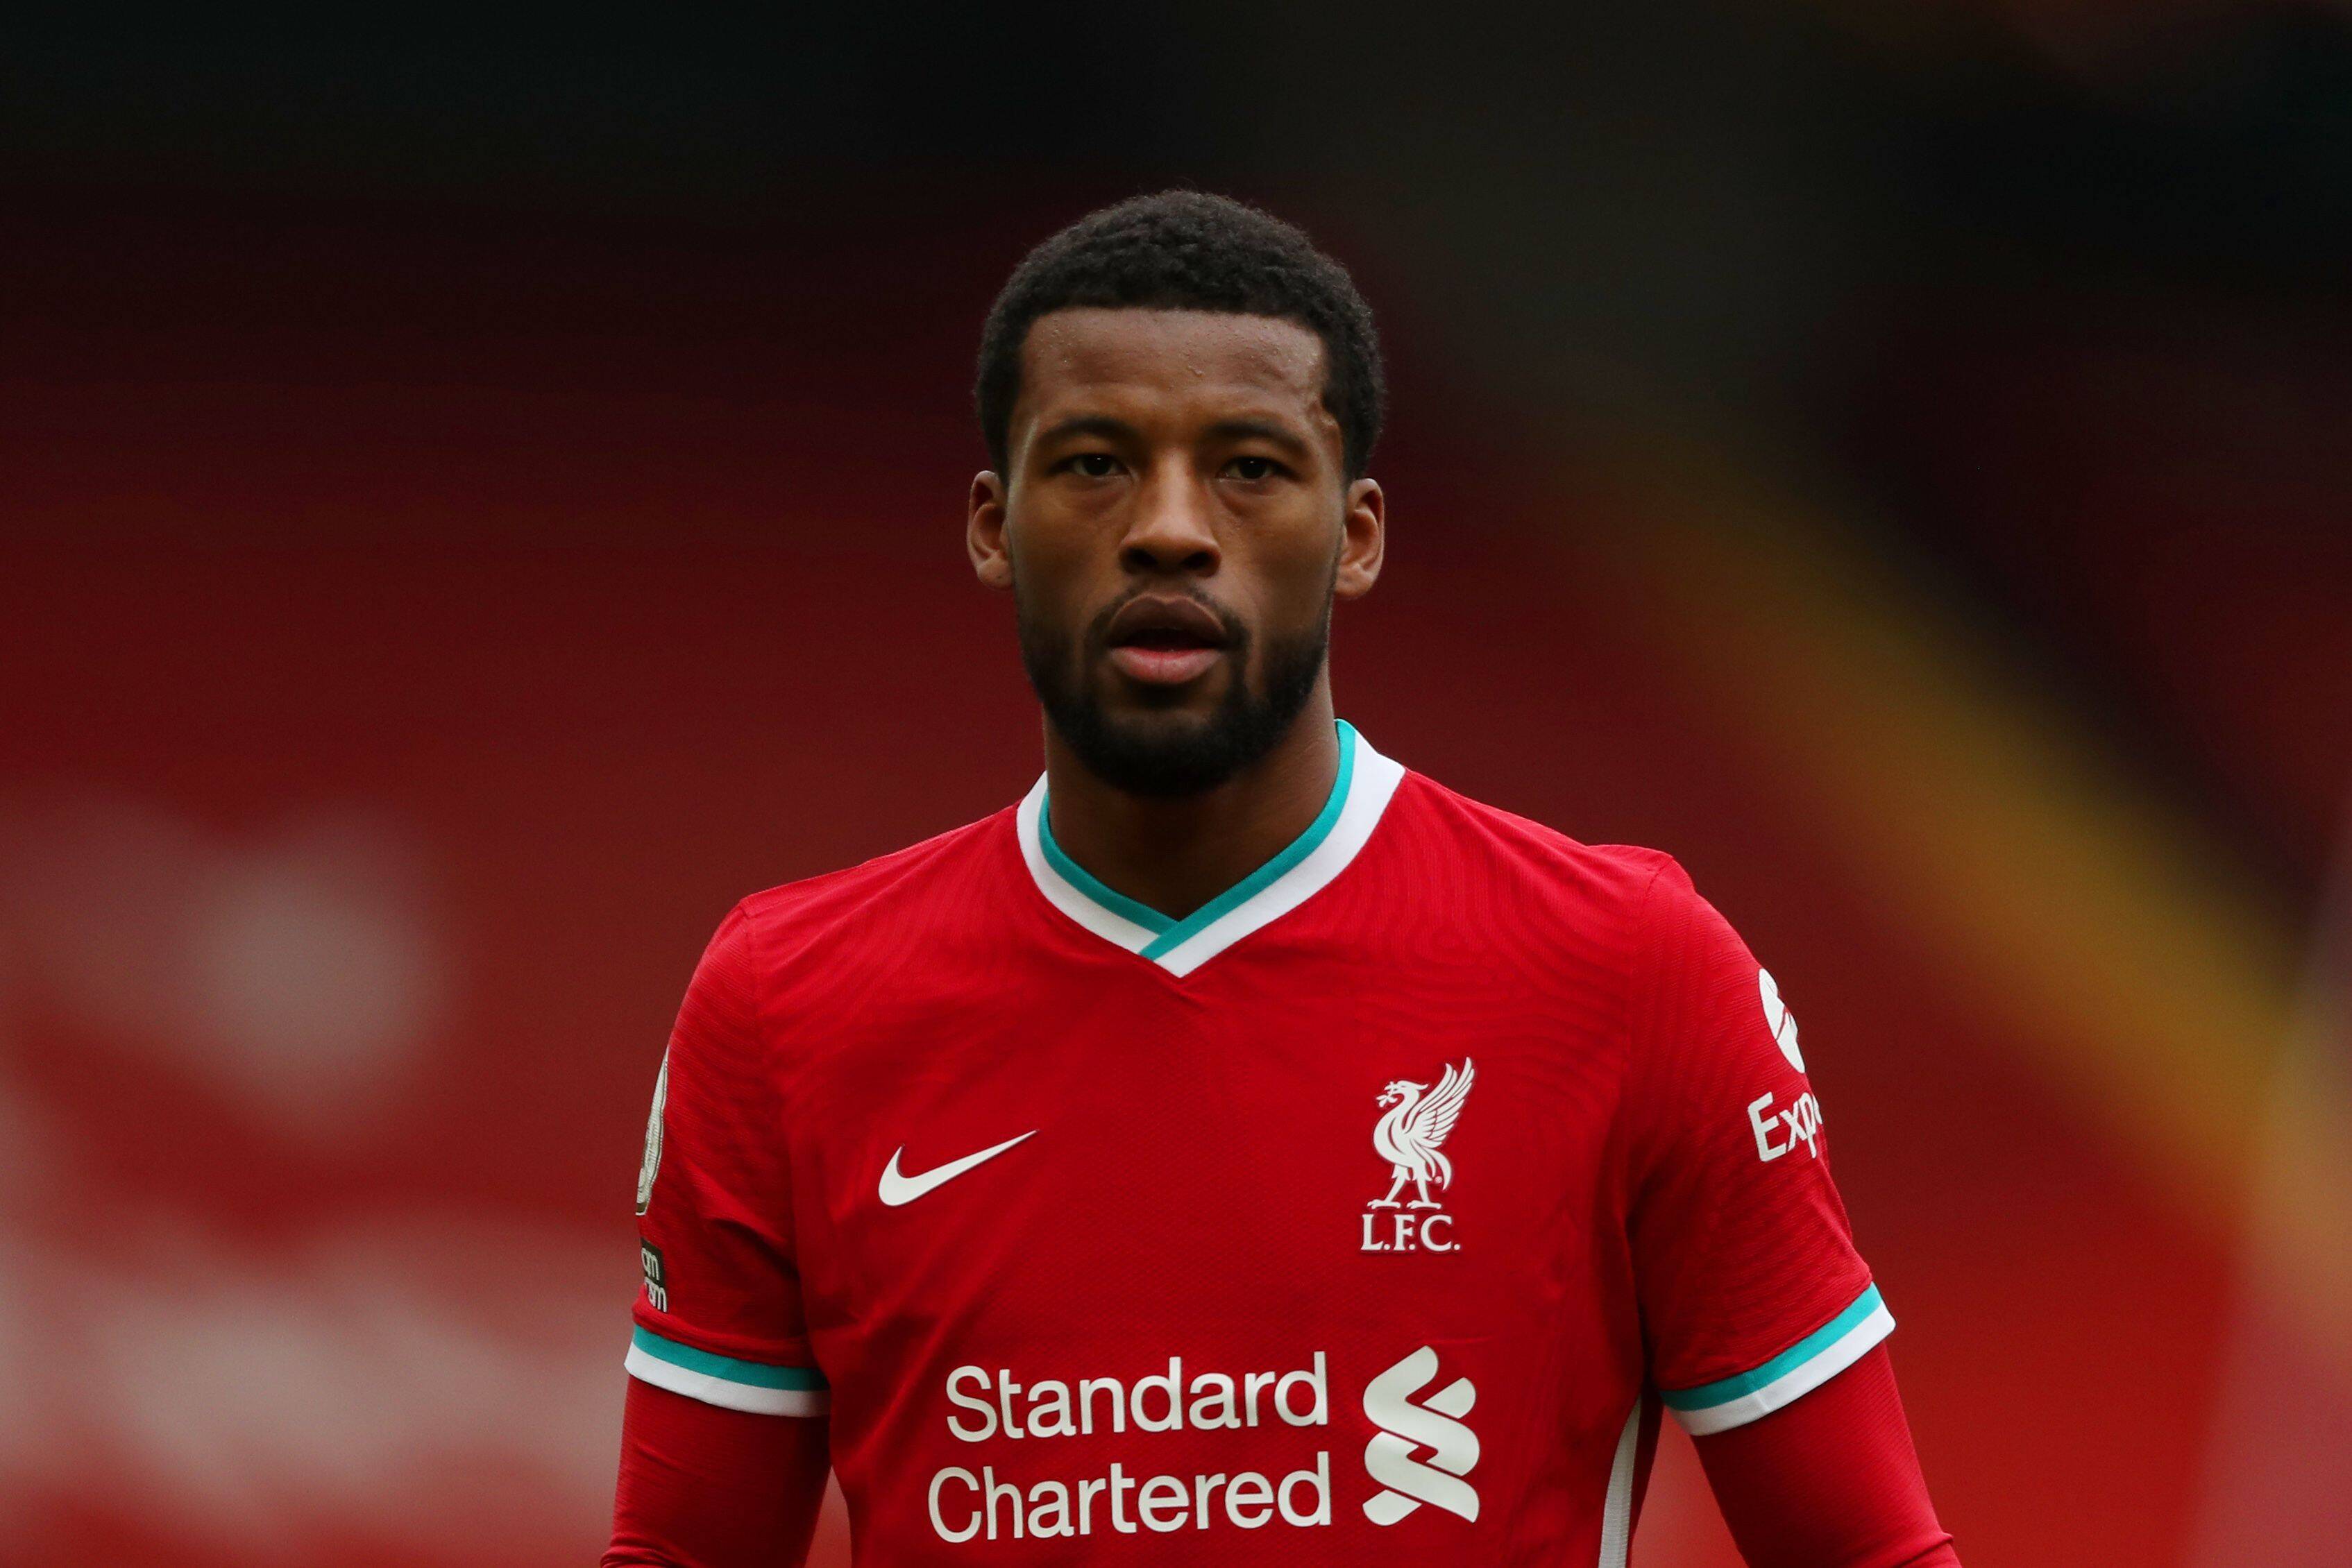 Gini Wijnaldum will have to renegotiate his contract with Liverpool